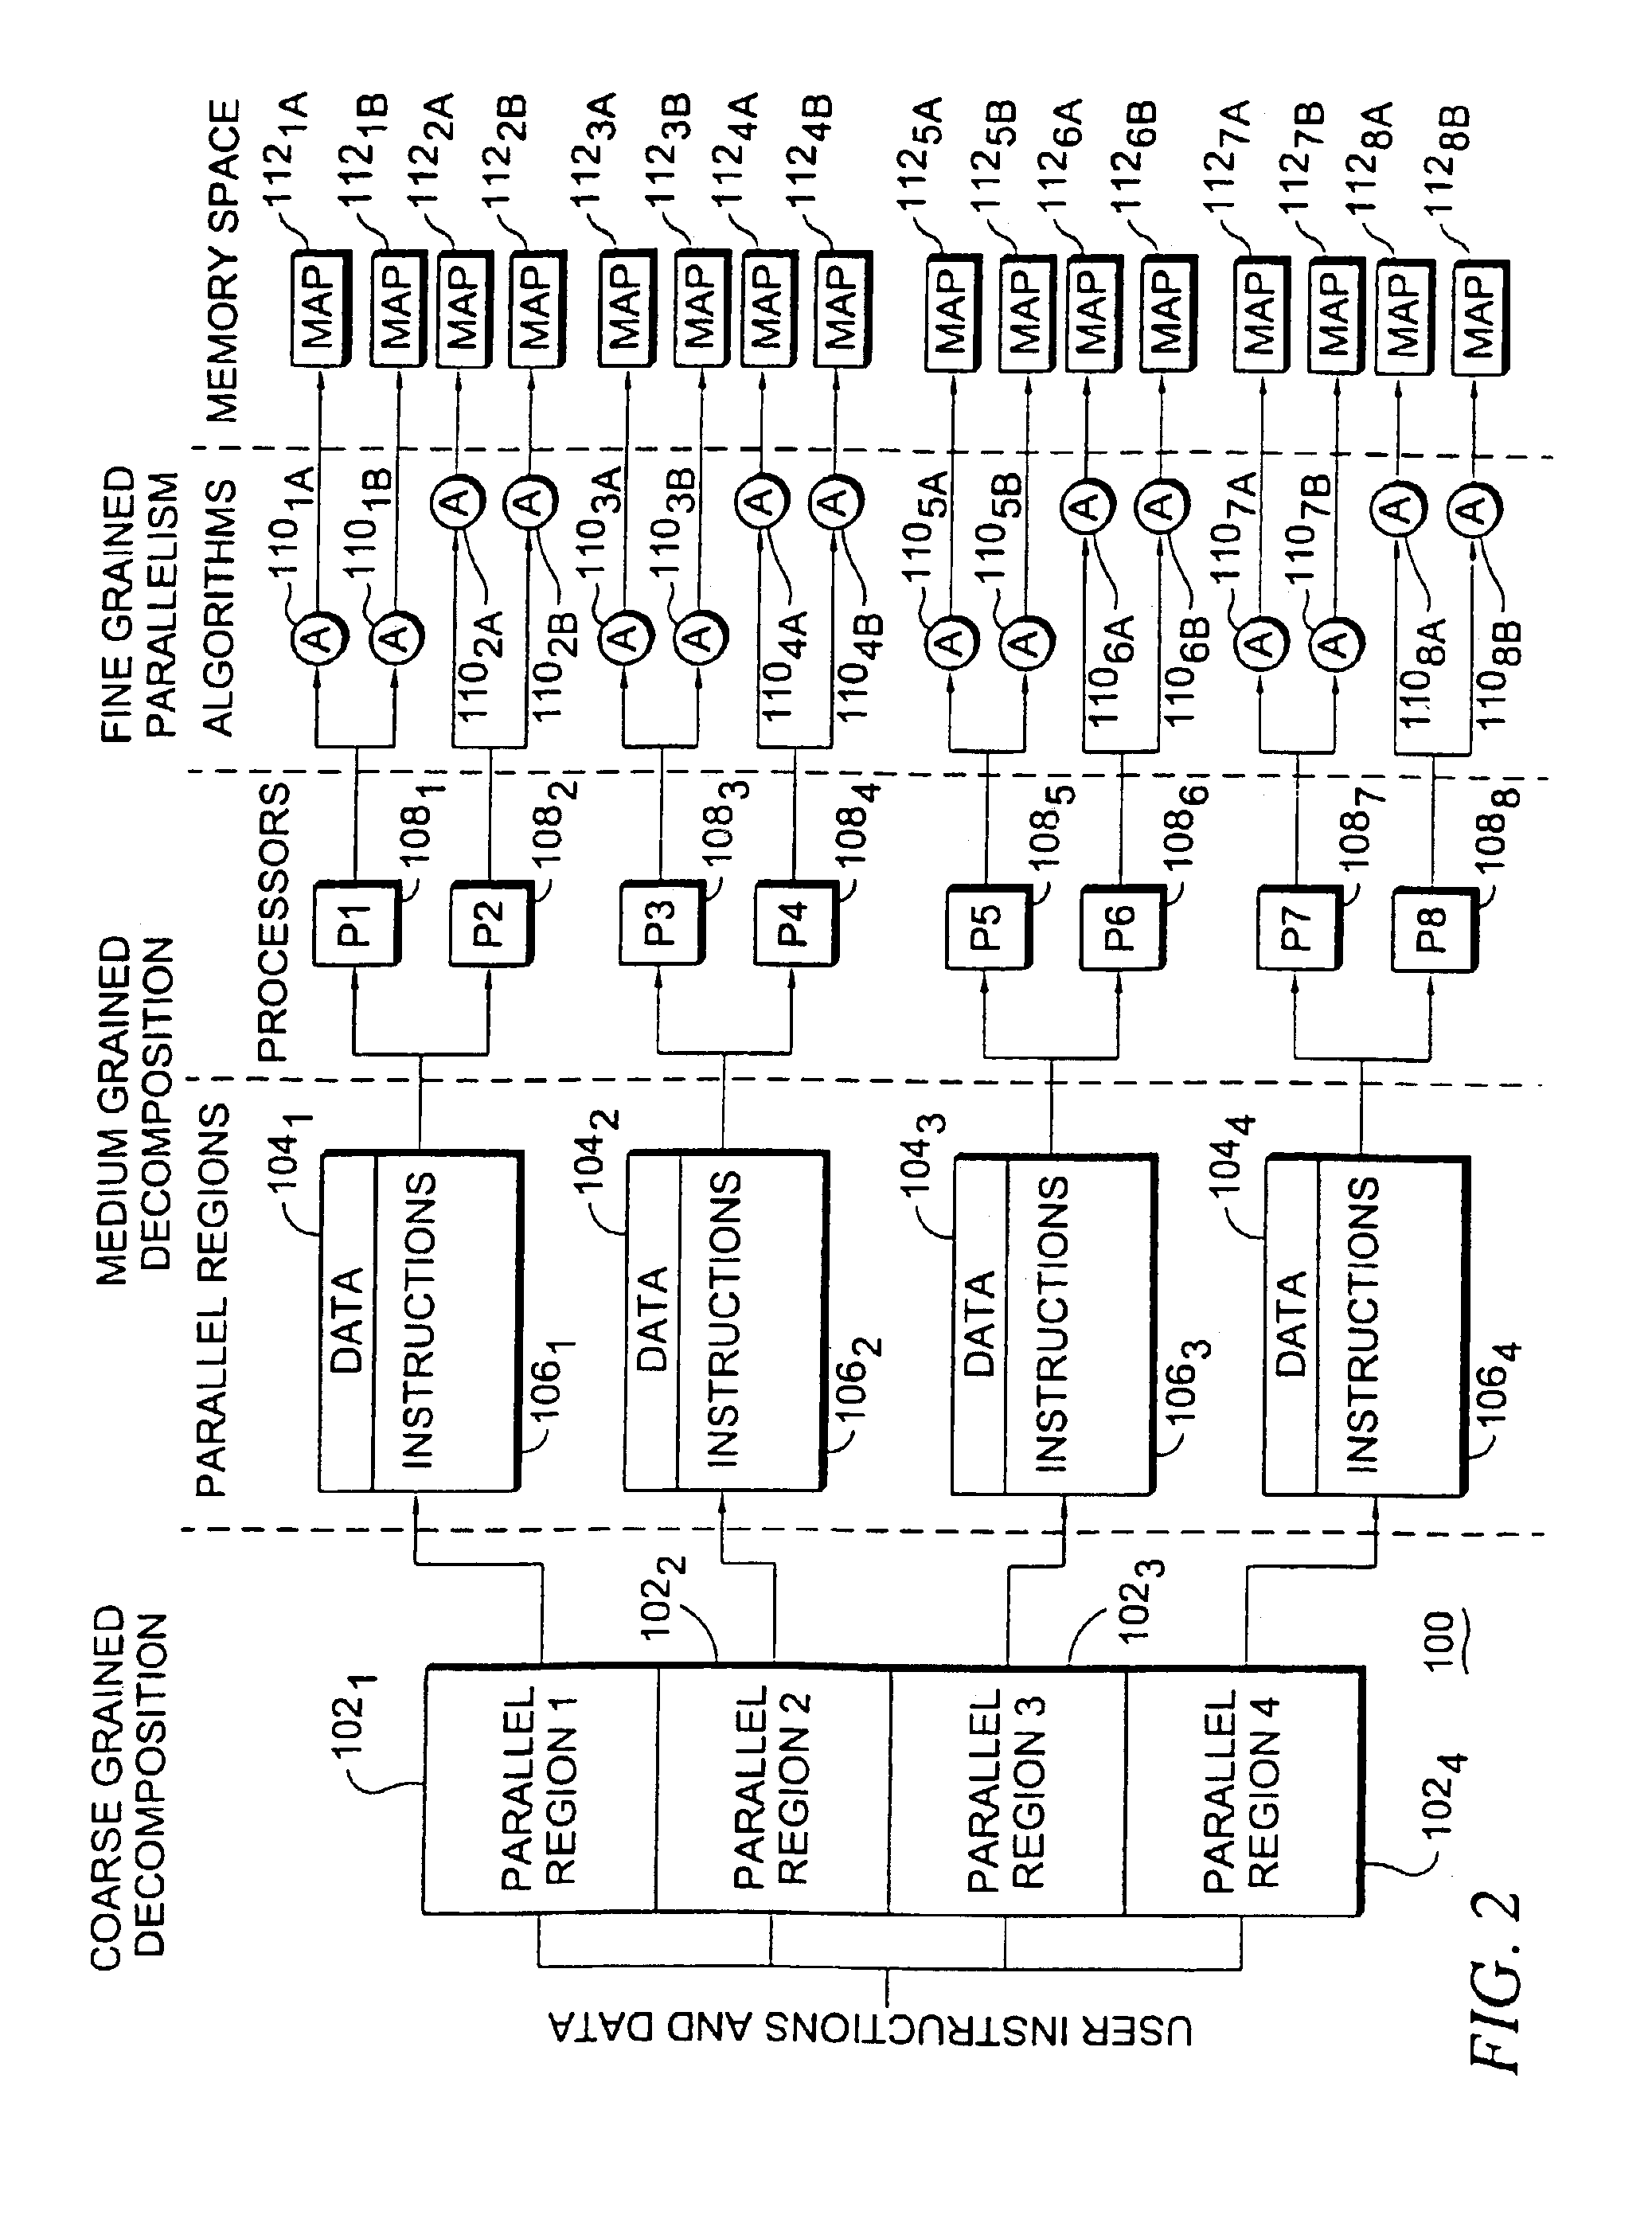 Multiprocessor computer architecture incorporating a plurality of memory algorithm processors in the memory subsystem